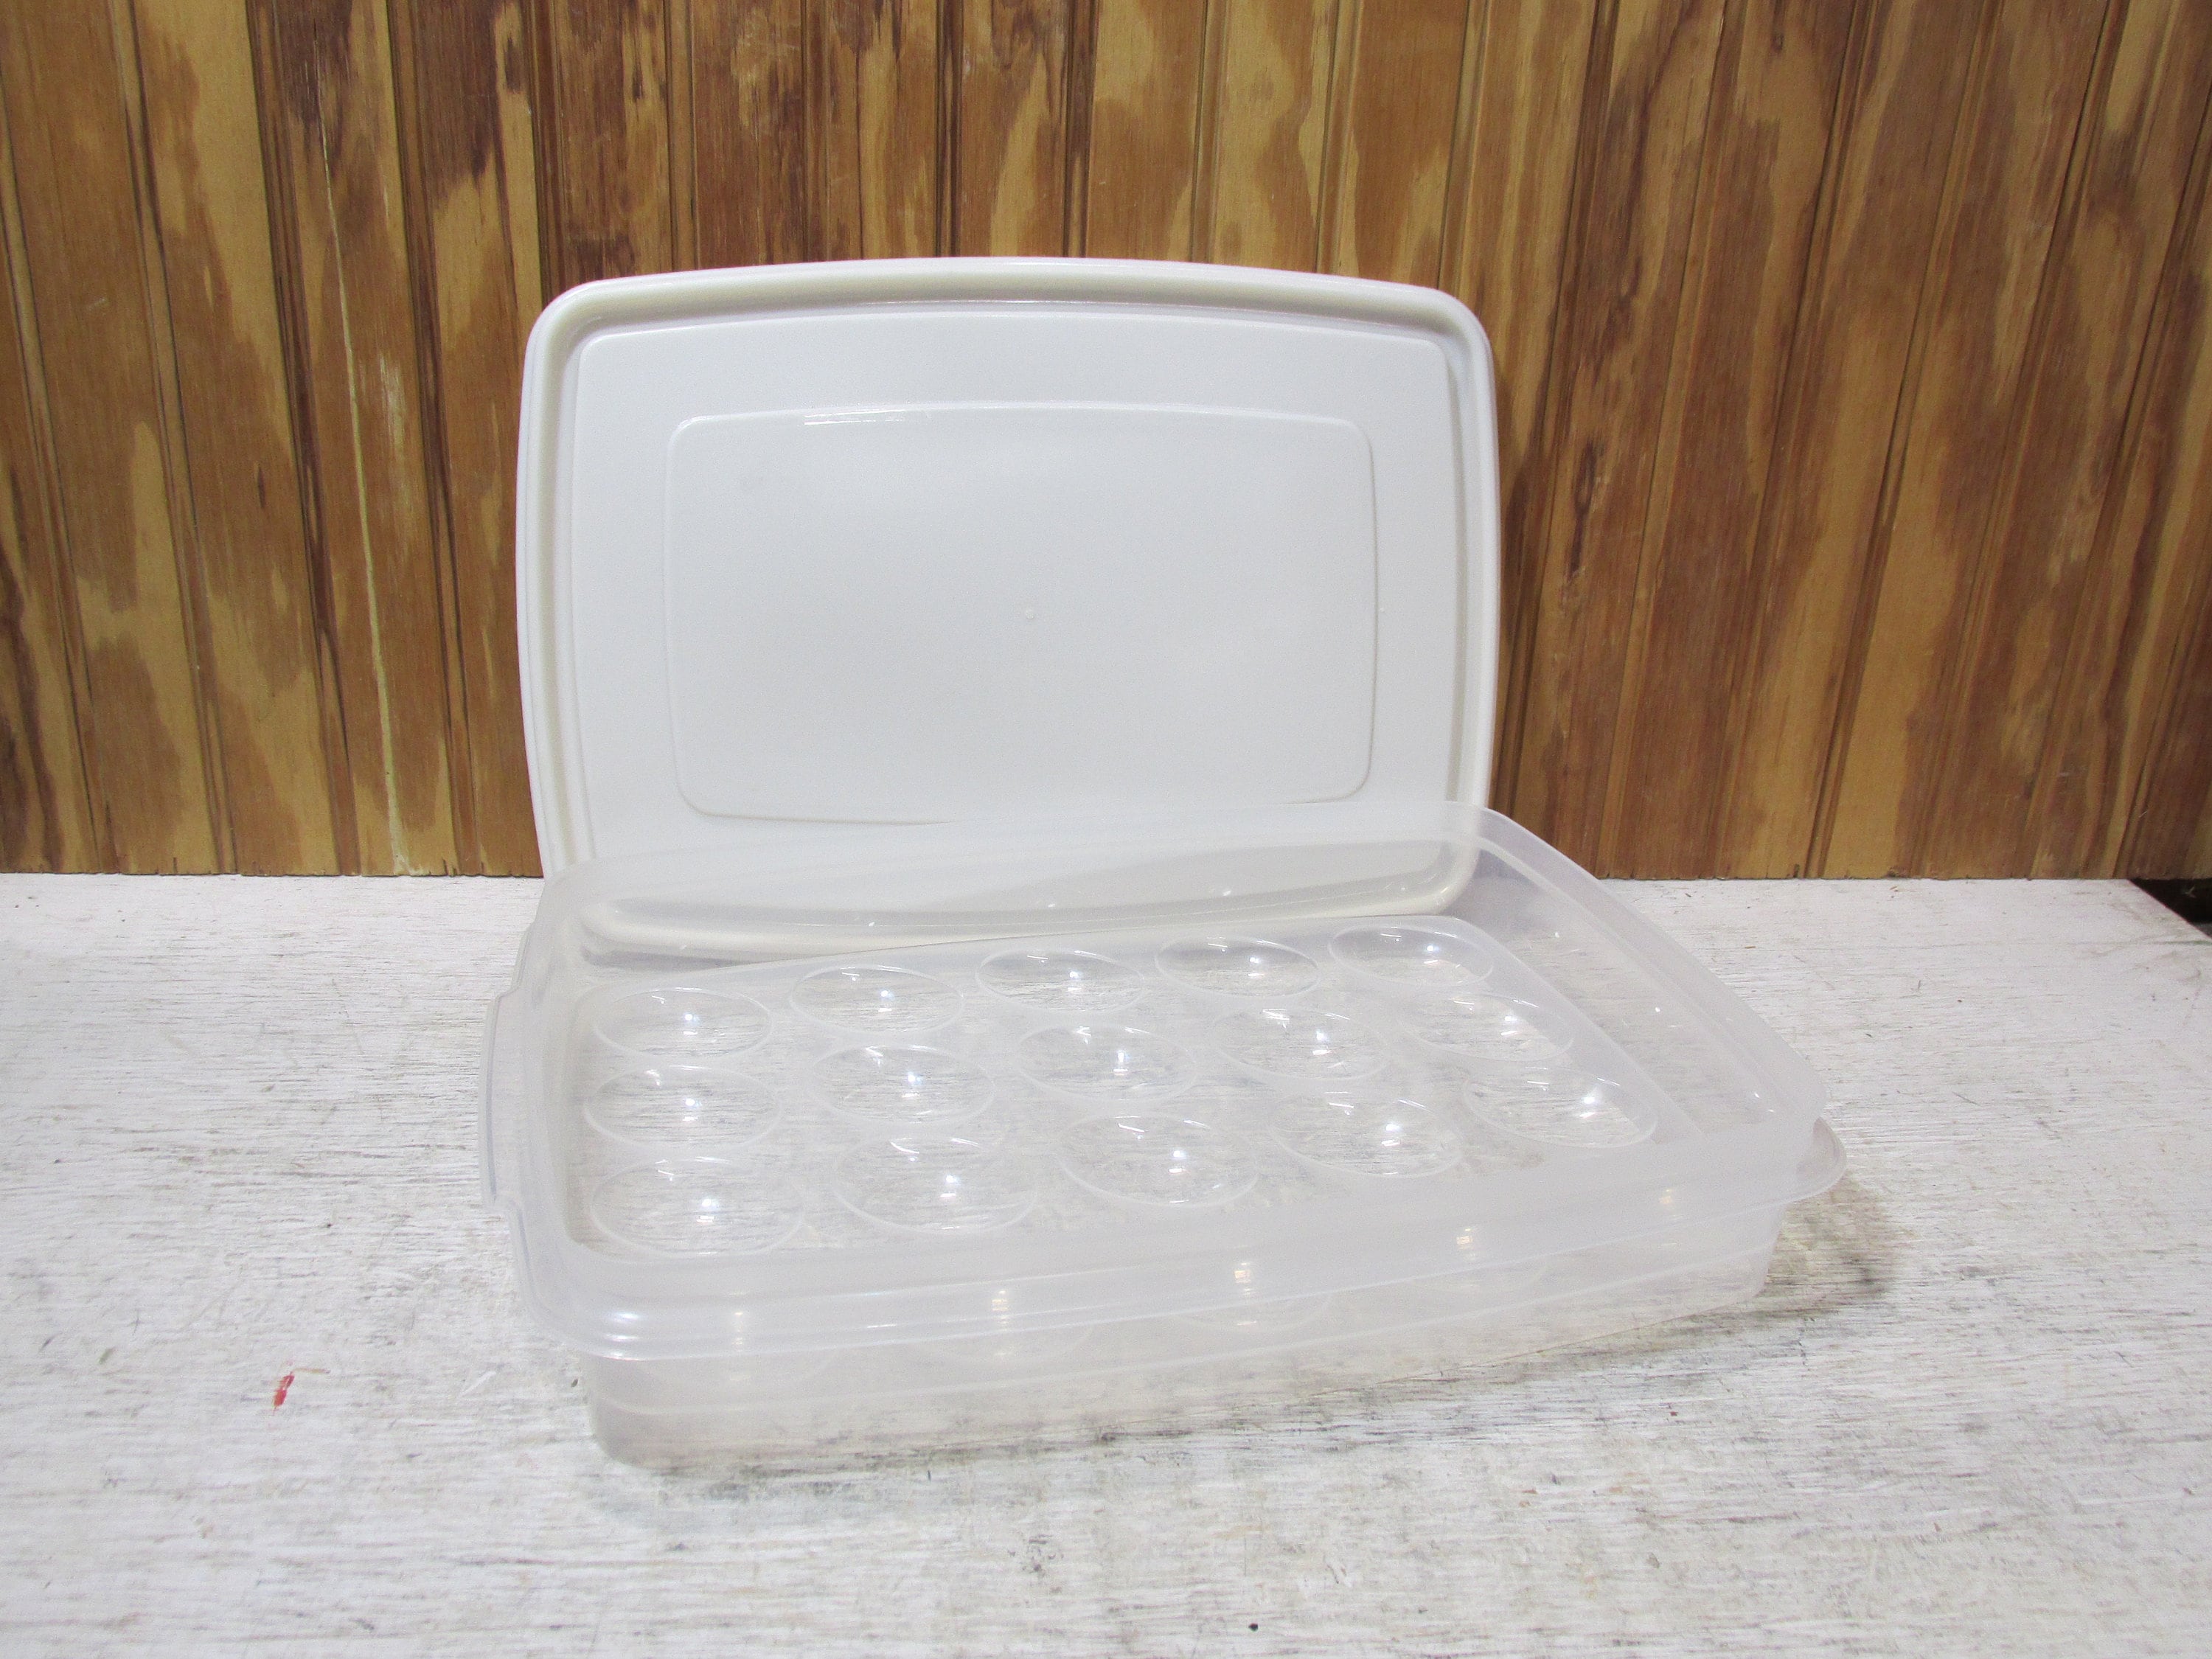 2 Rubbermaid Servin Saver Small Round Containers Almond Lids #0 1